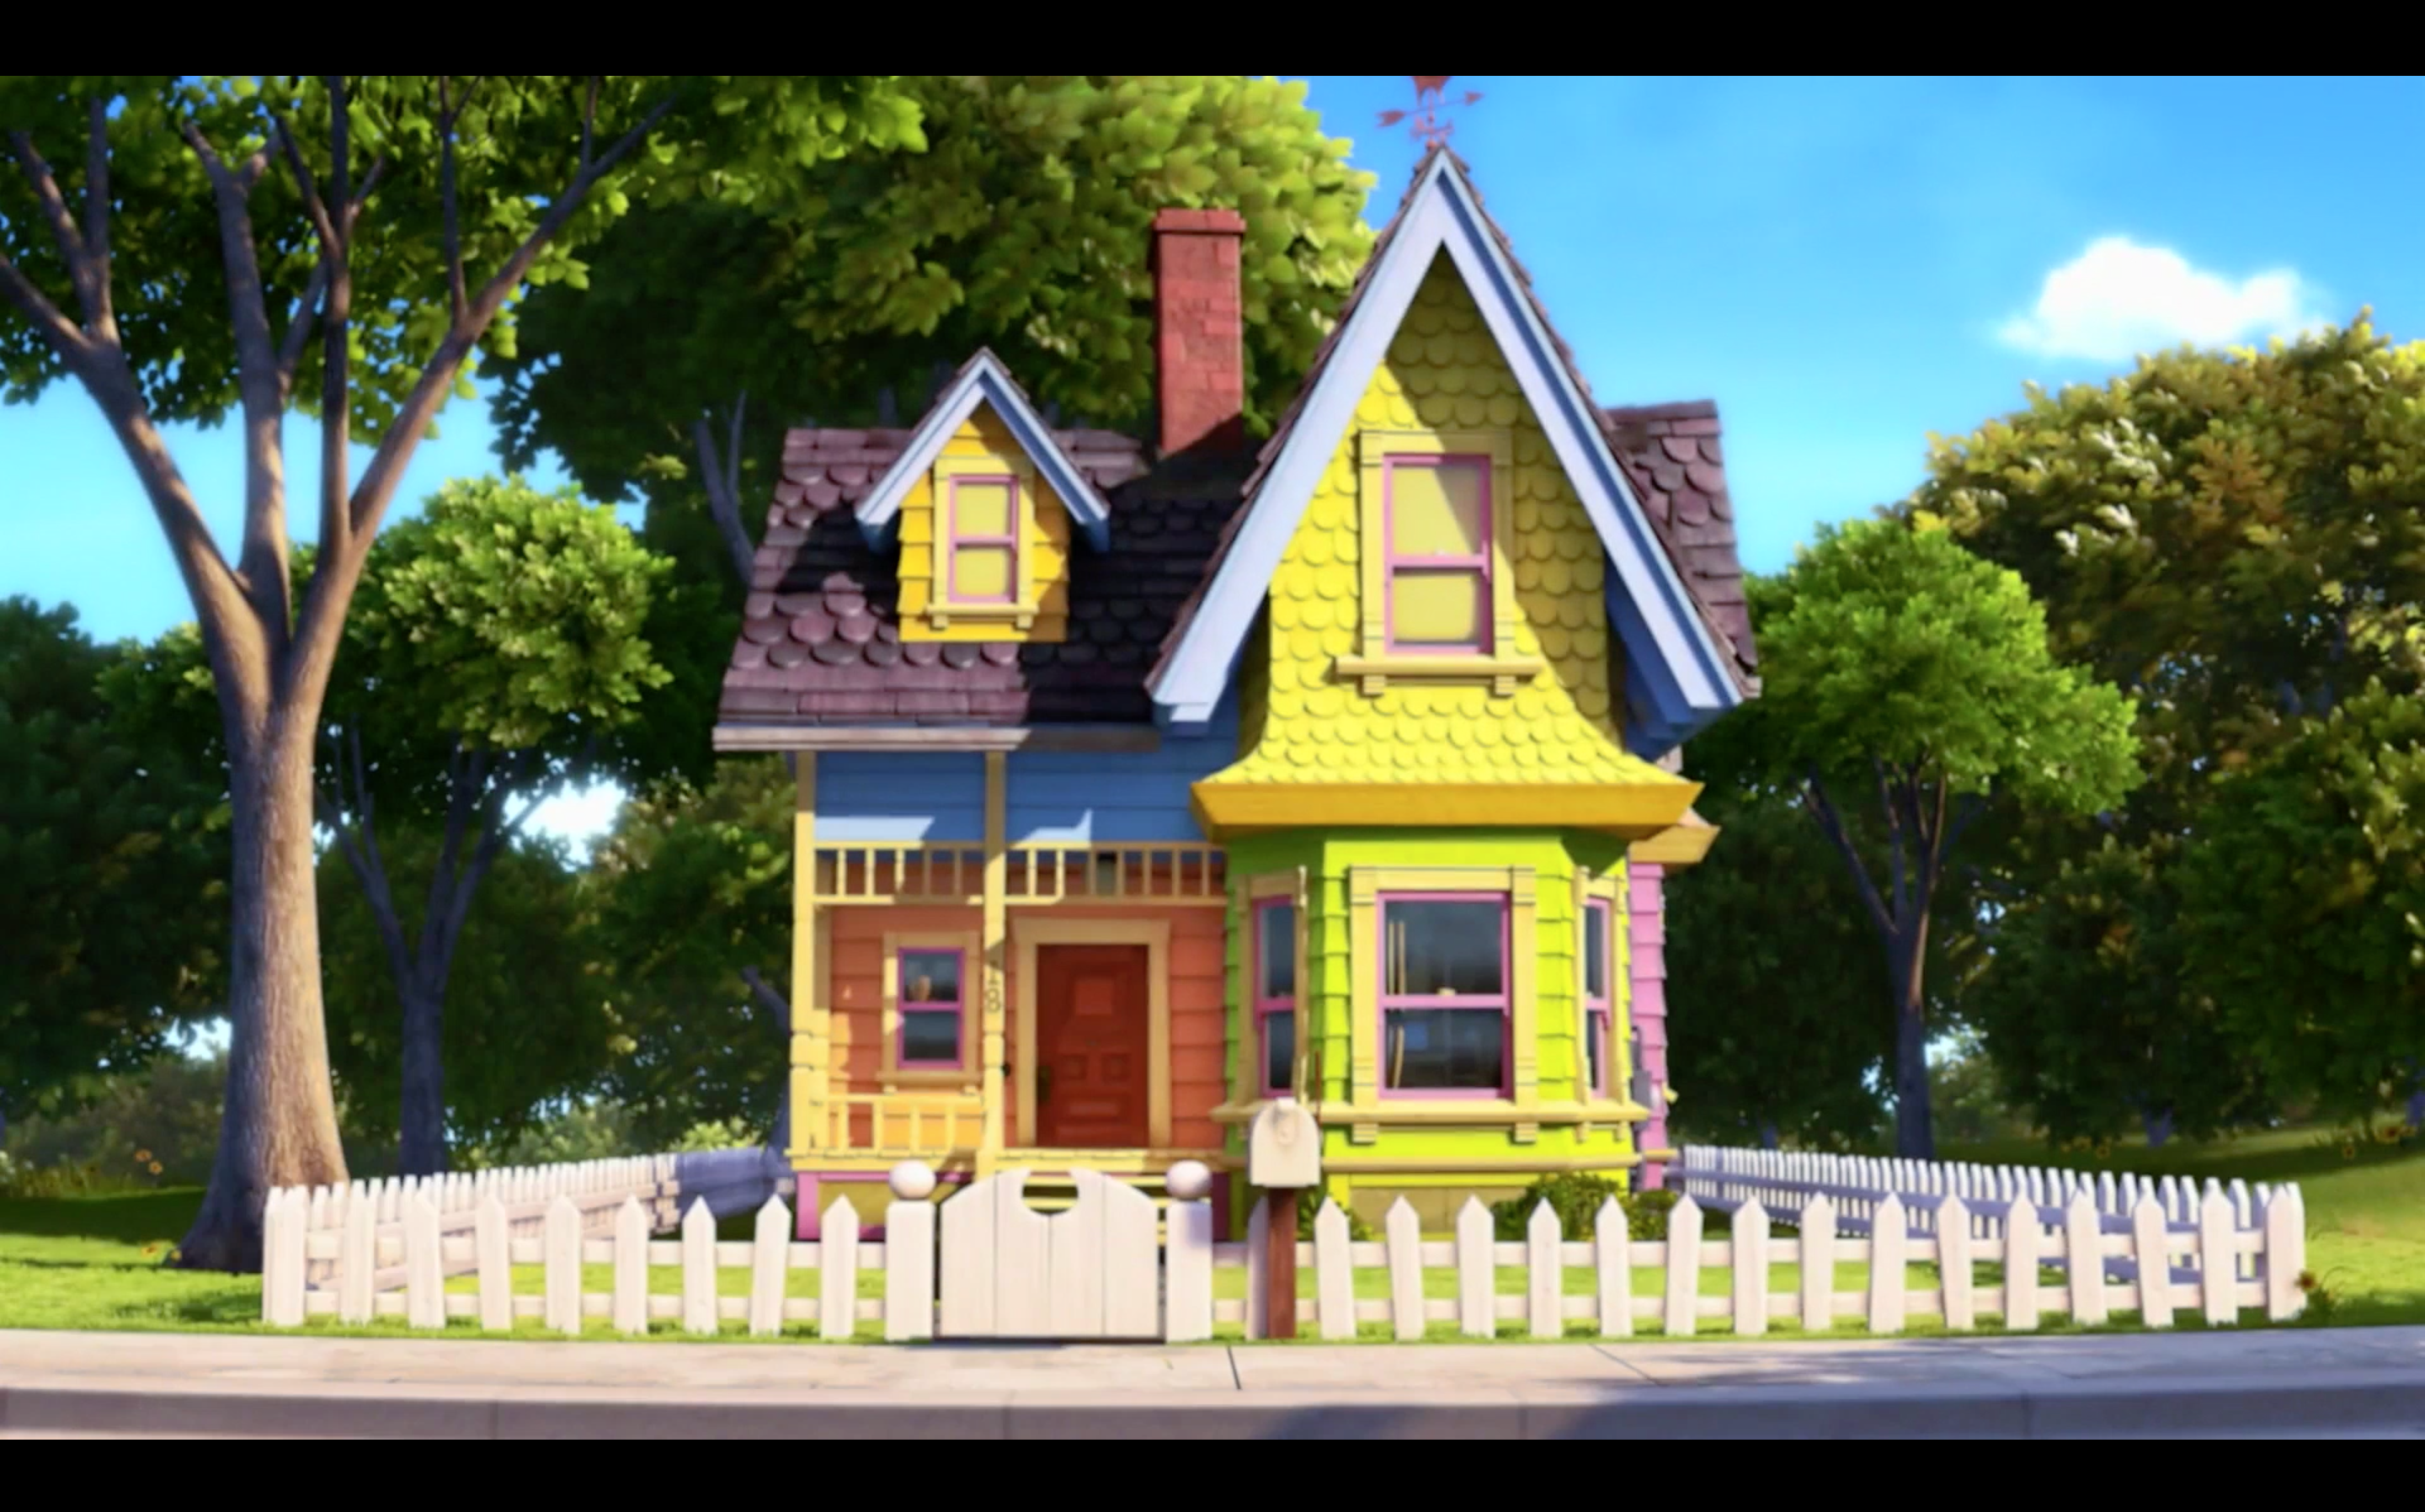 The original UP! House used for inspiration. Image source: AWE Me